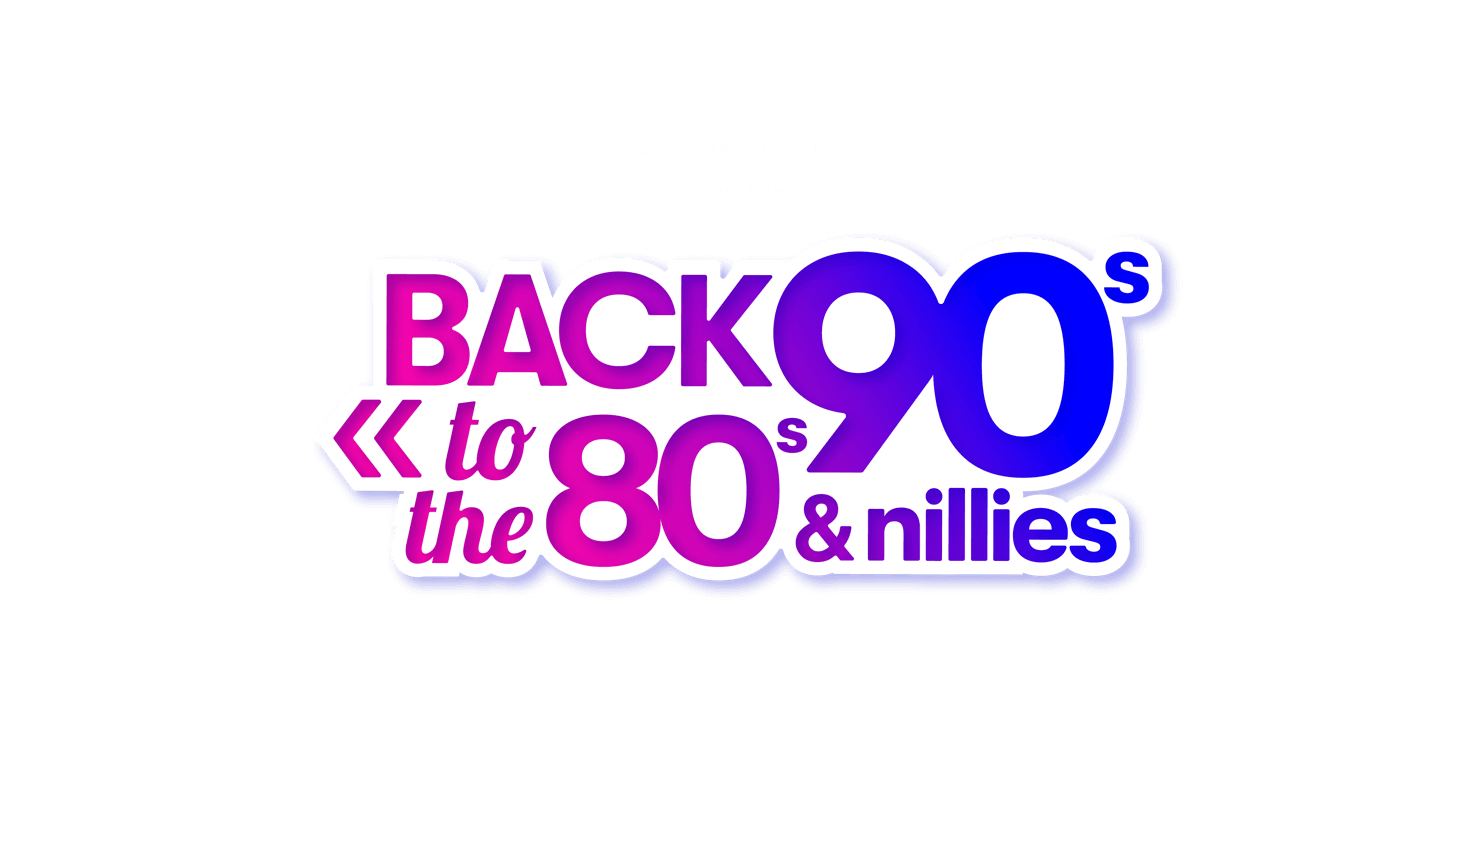 MNM & Radio2 - Back to the 80s, 90s & Nillies